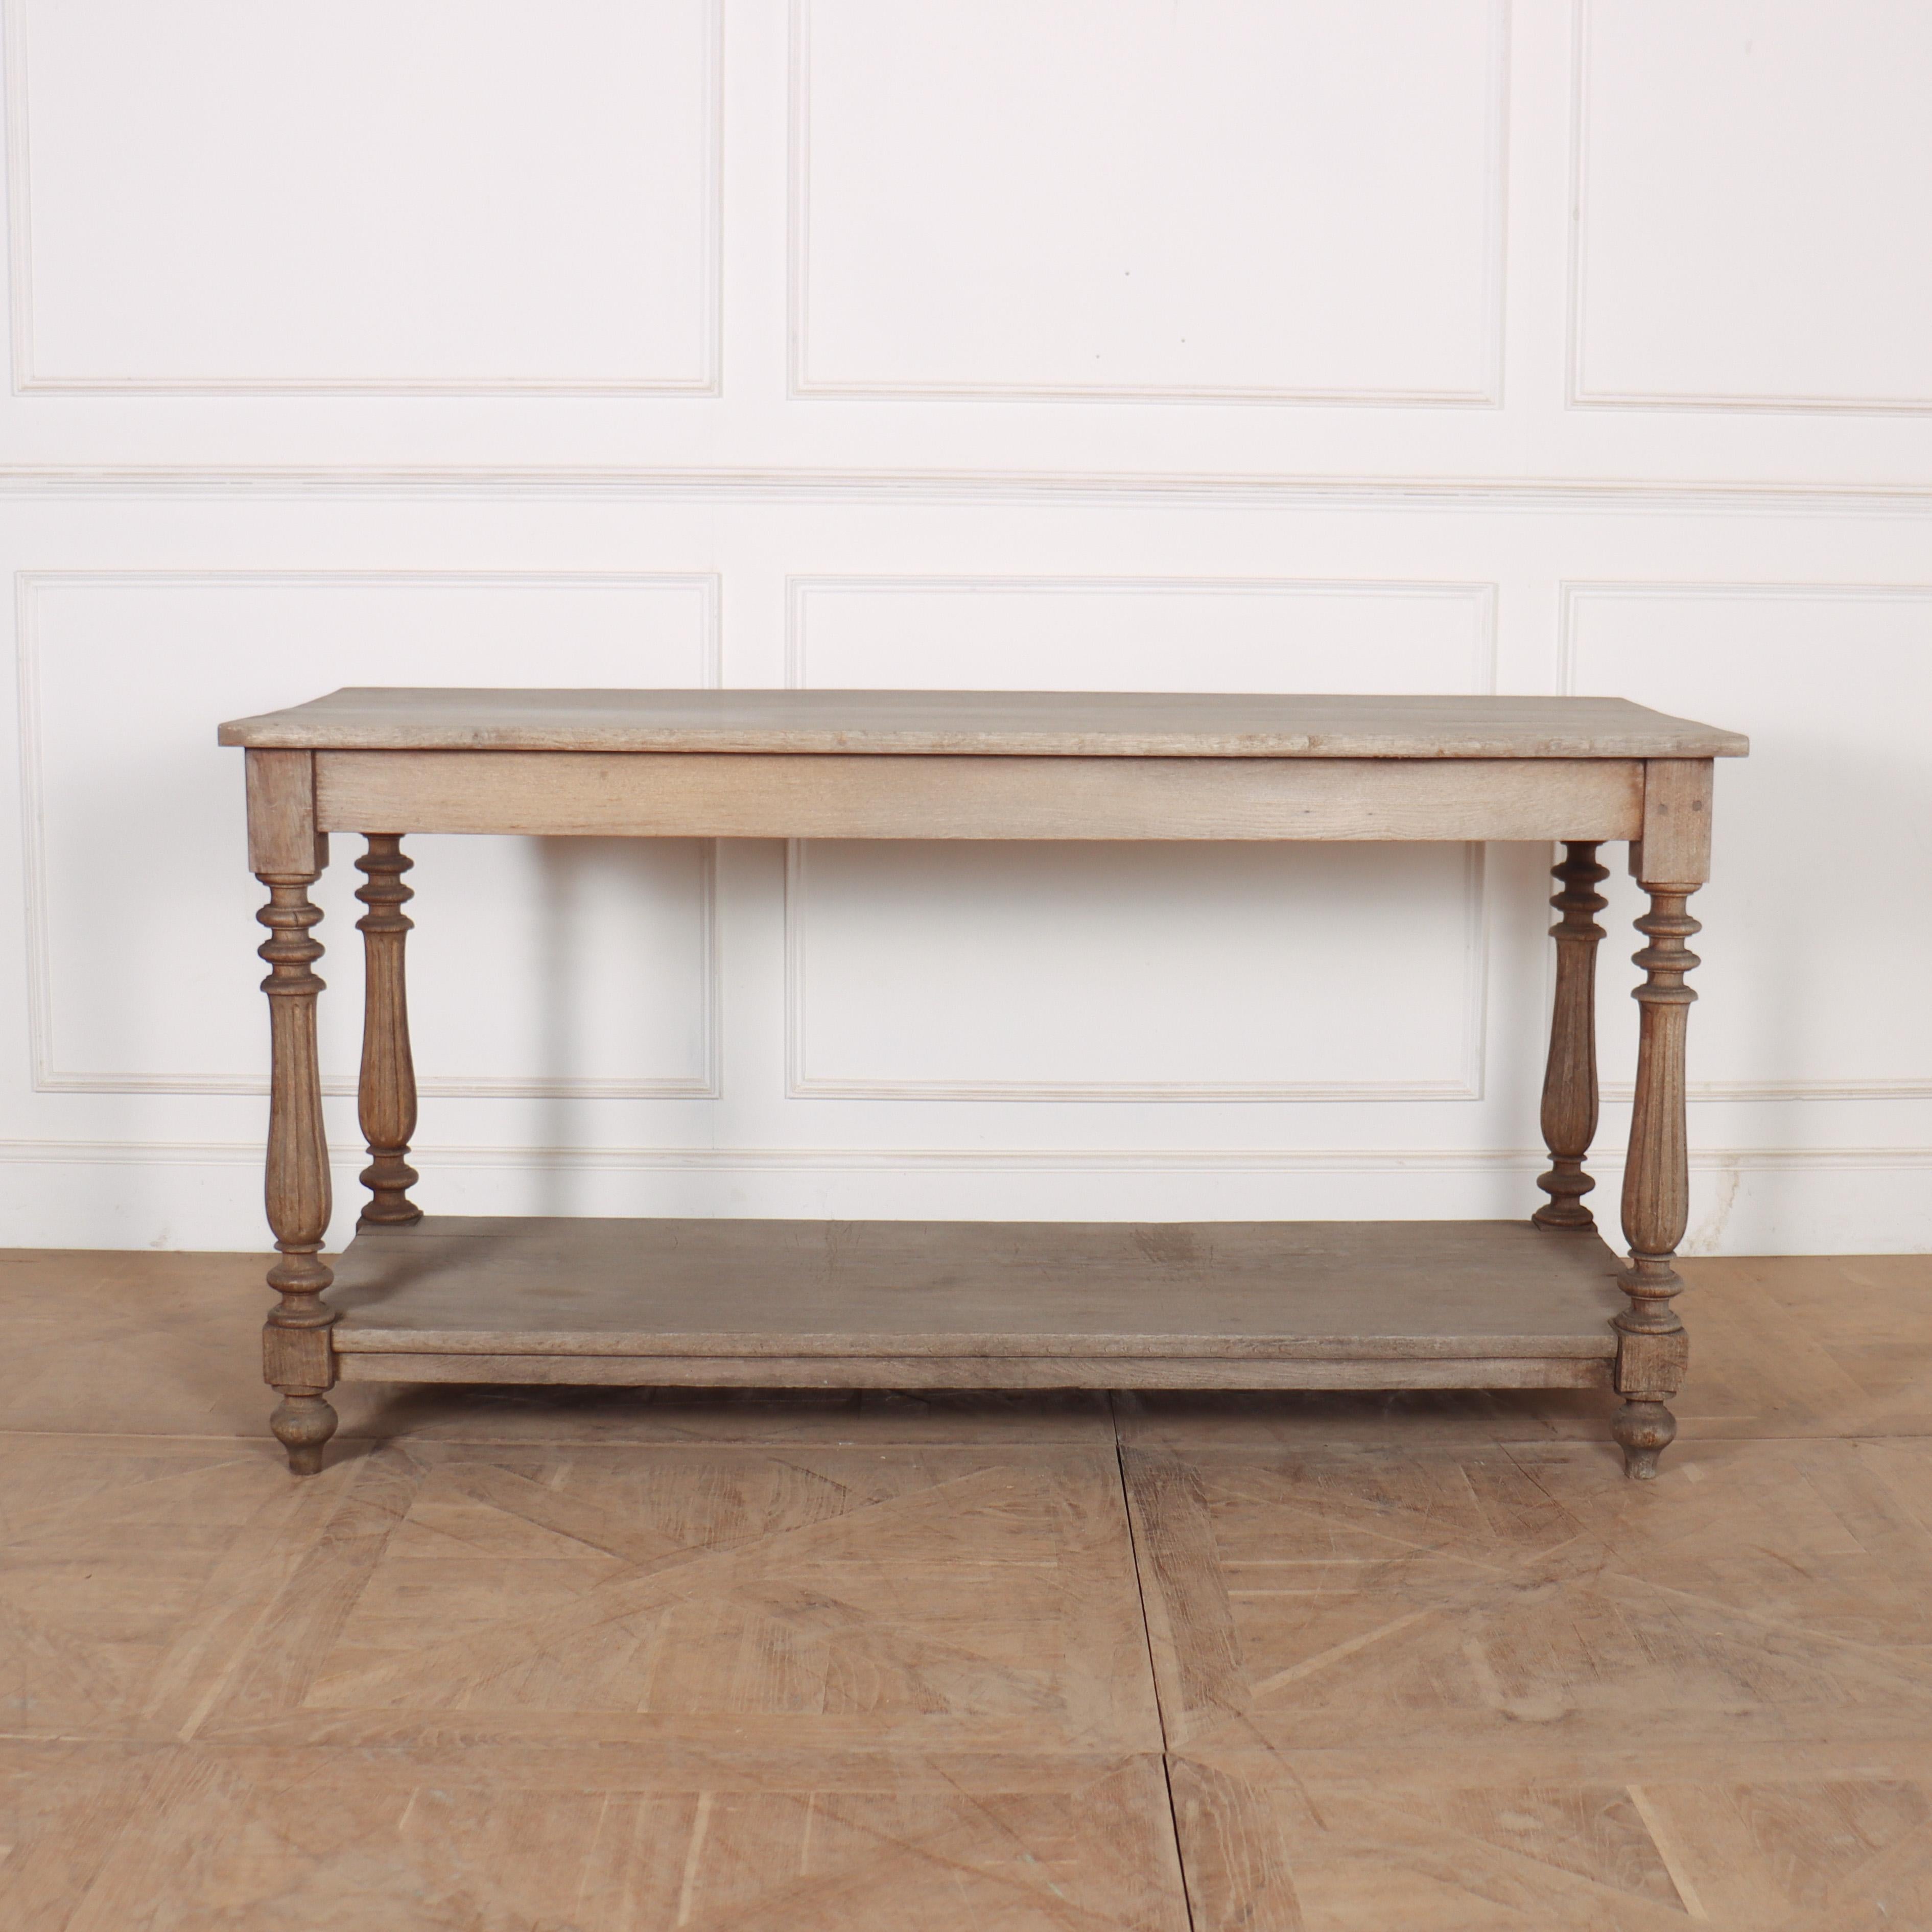 Pretty 19th C French bleached oak drapers table. 1860.



Dimensions
68.5 inches (174 cms) Wide
26.5 inches (67 cms) Deep
35.5 inches (90 cms) High.